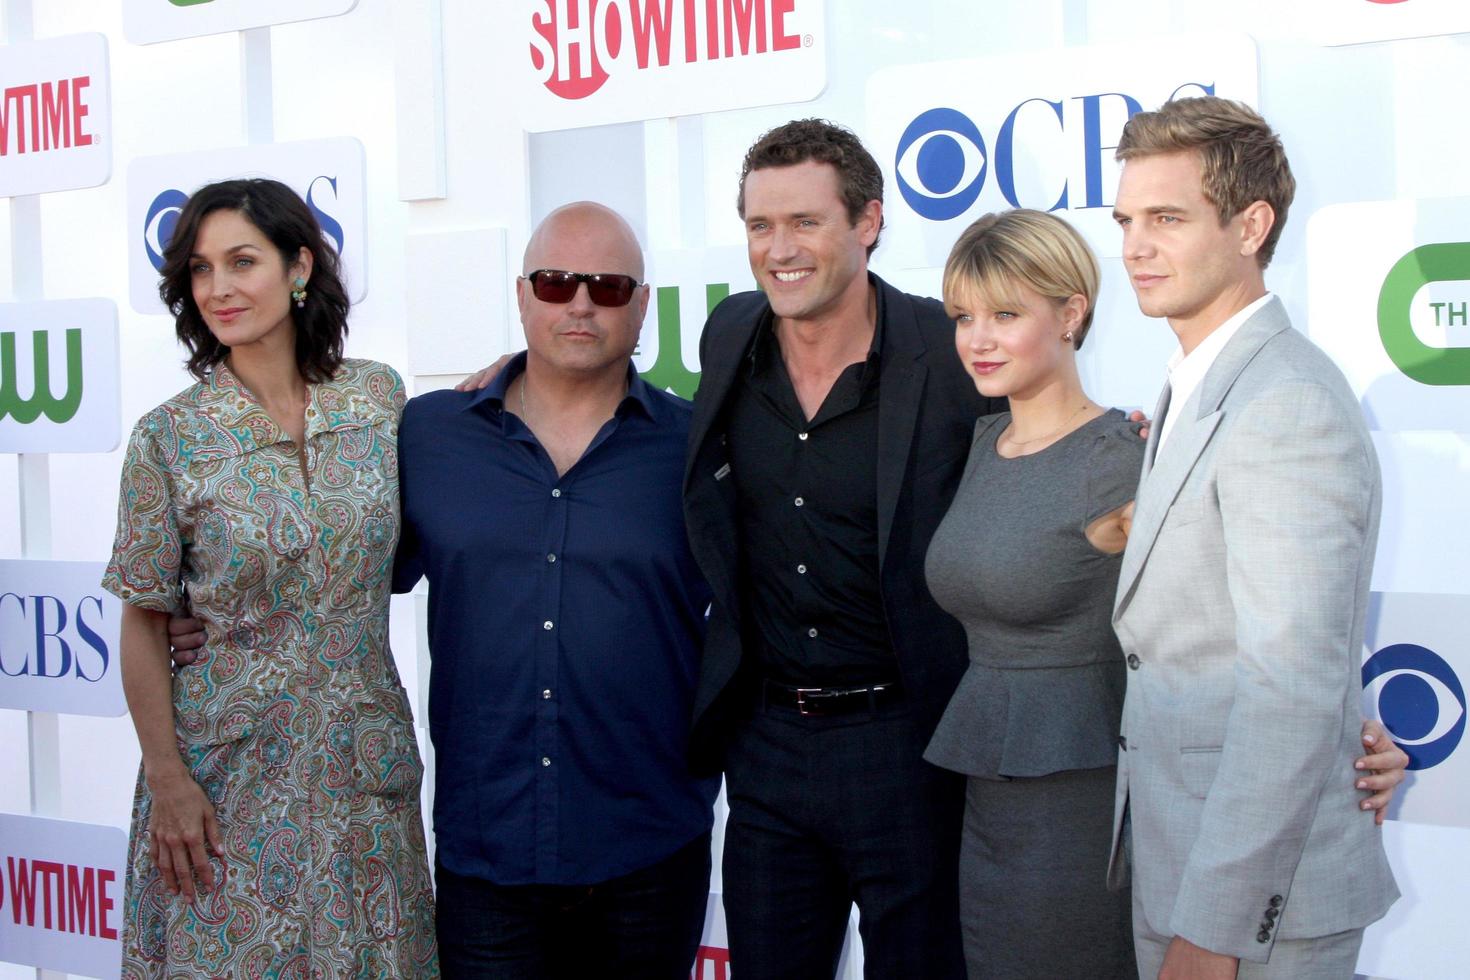 LOS ANGELES, JUL 29 - Carrie-Anne Moss, Michael Chiklis, Jason O Mara, Sarah Jones, Taylor Handley arrives at the CBS, CW, and Showtime 2012 Summer TCA party at Beverly Hilton Hotel Adjacent Parking Lot on July 29, 2012 in Beverly Hills, CA photo